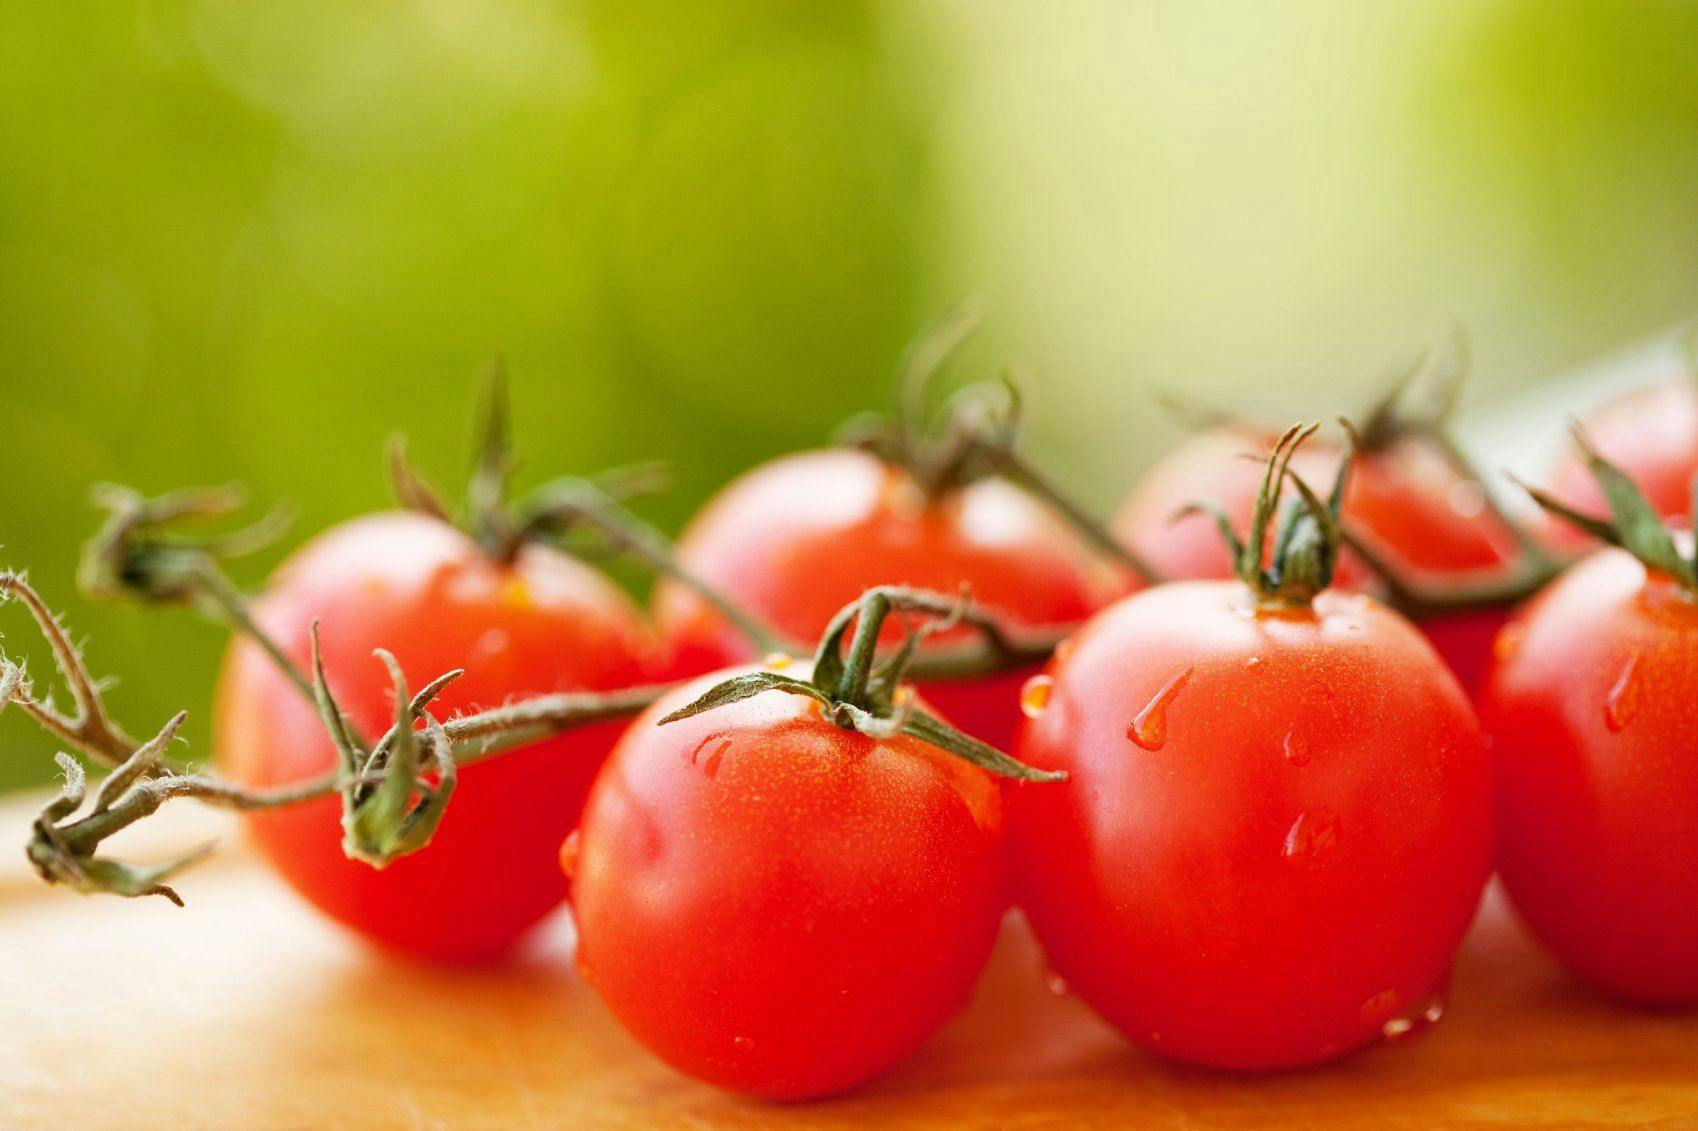 Lycopene Affects Systolic Blood Pressure